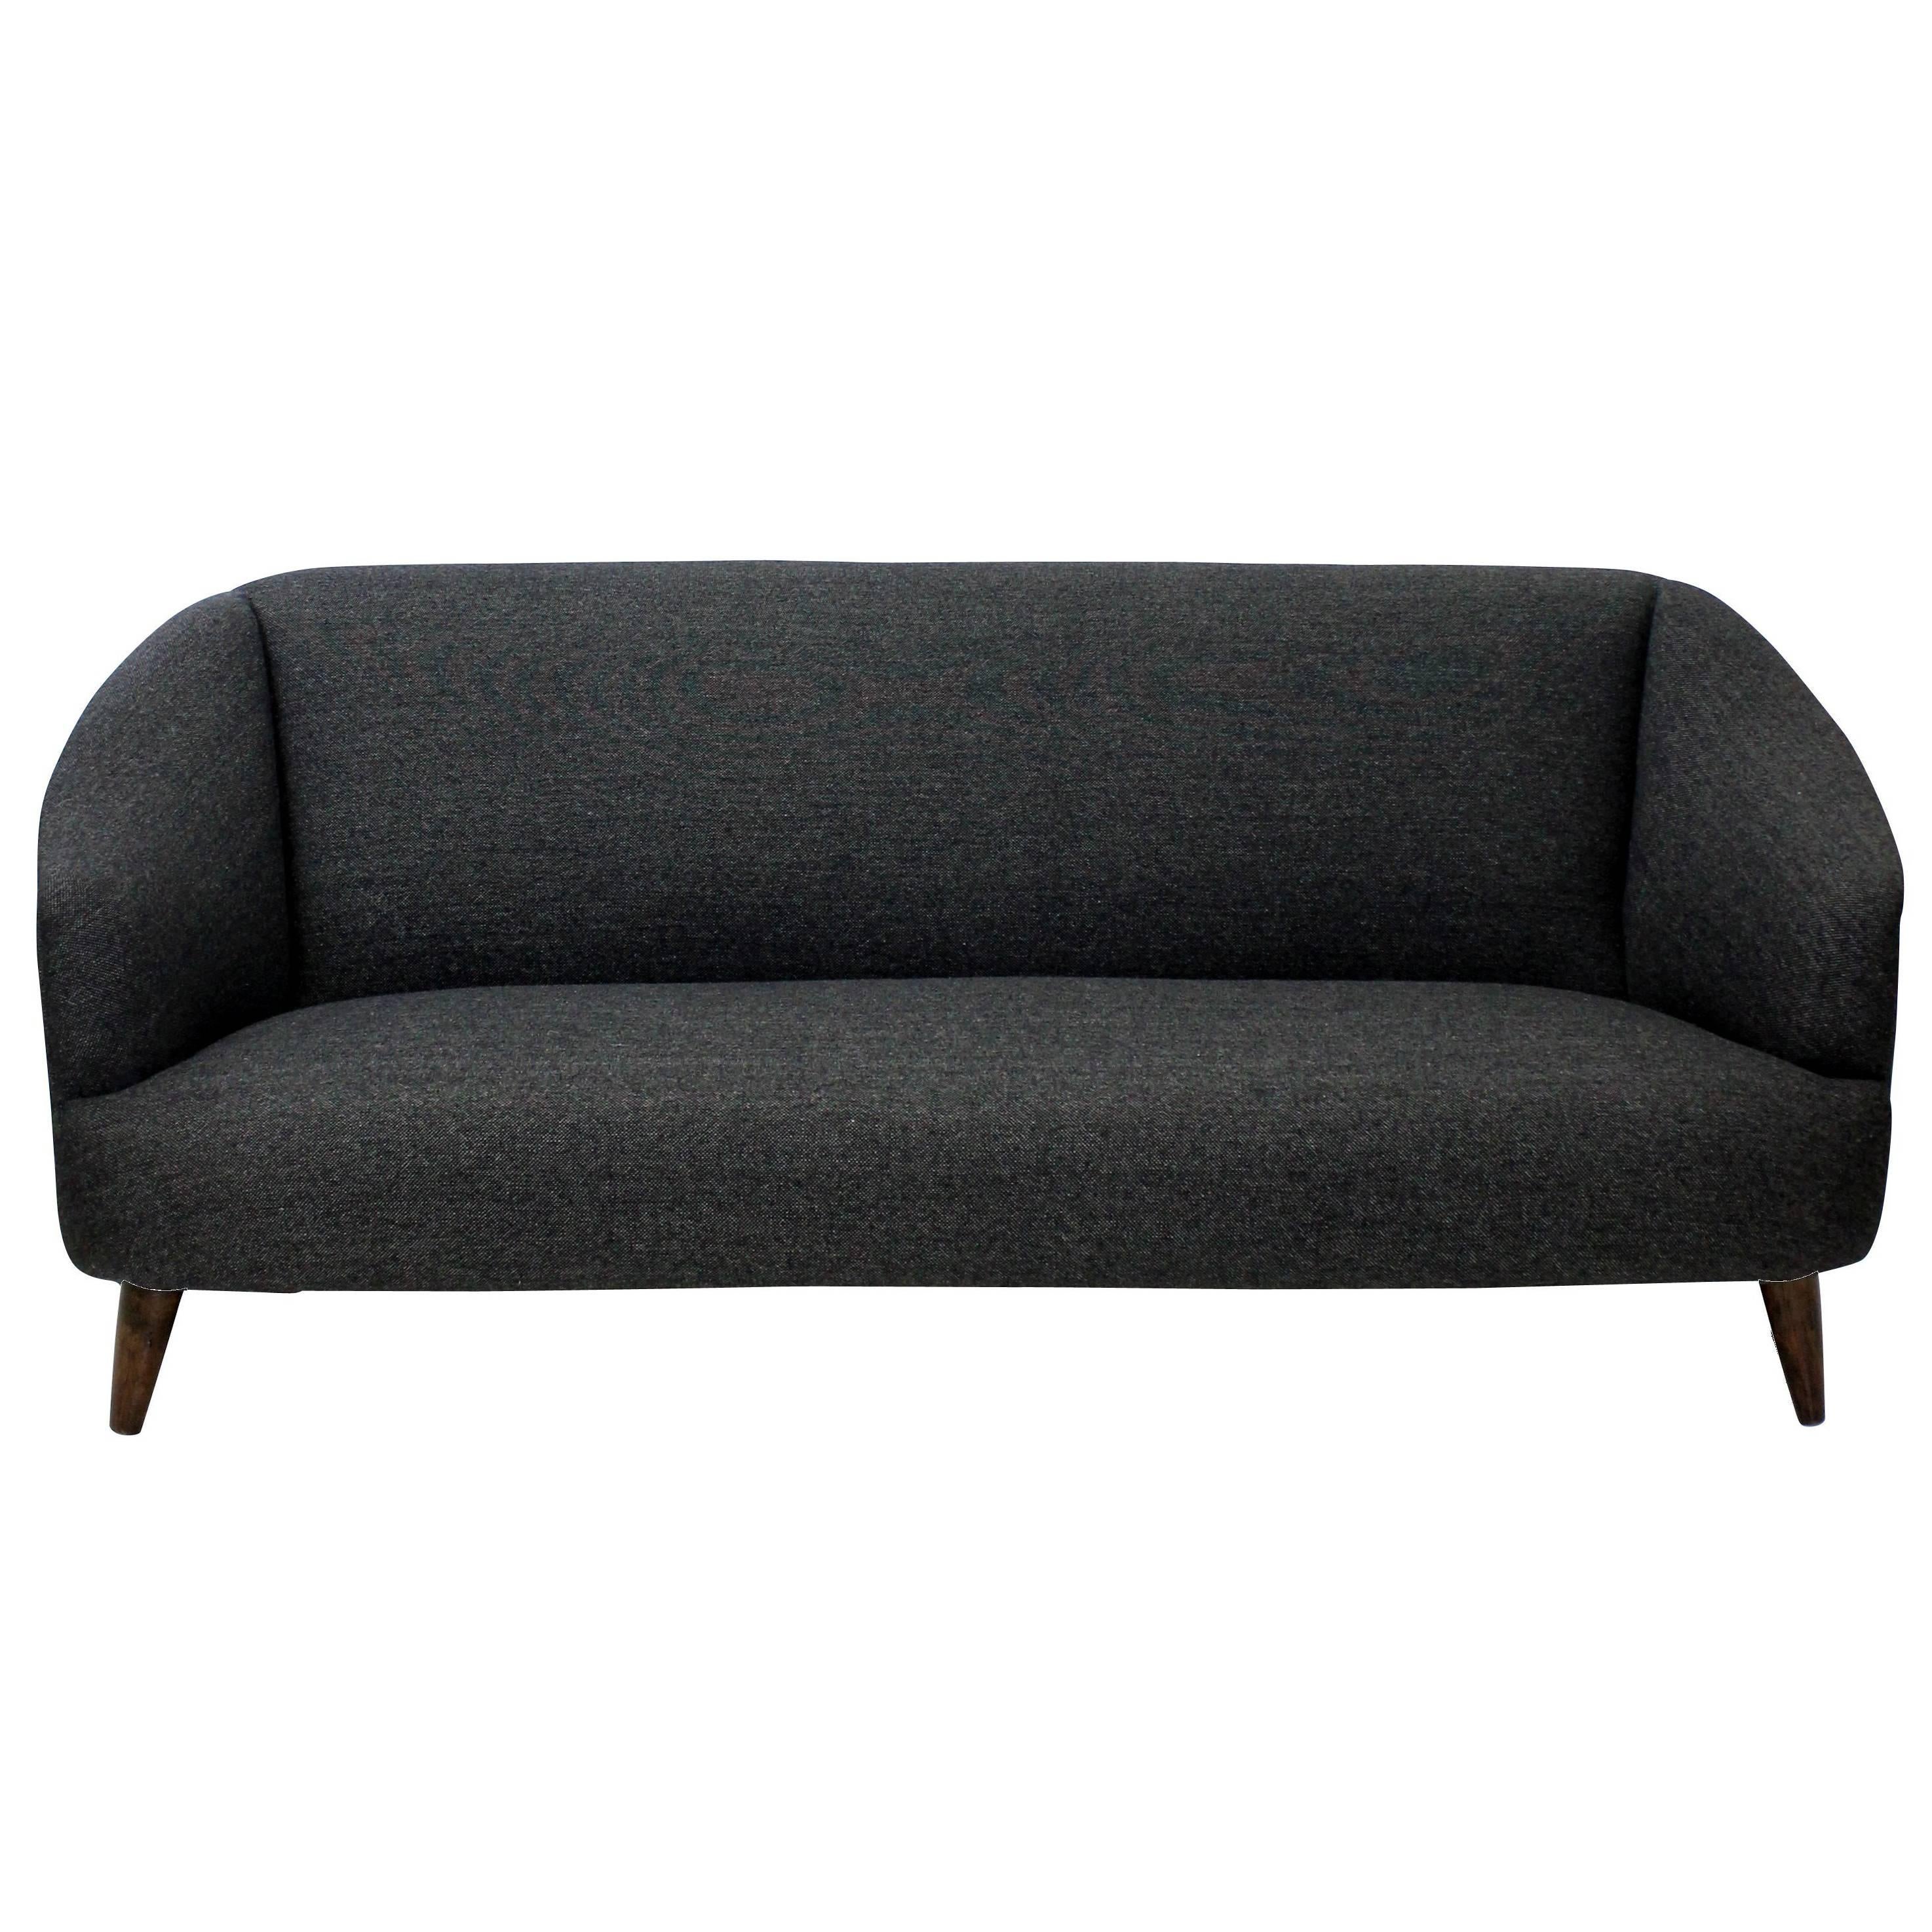 Large Sculptural Settee by Ulrich